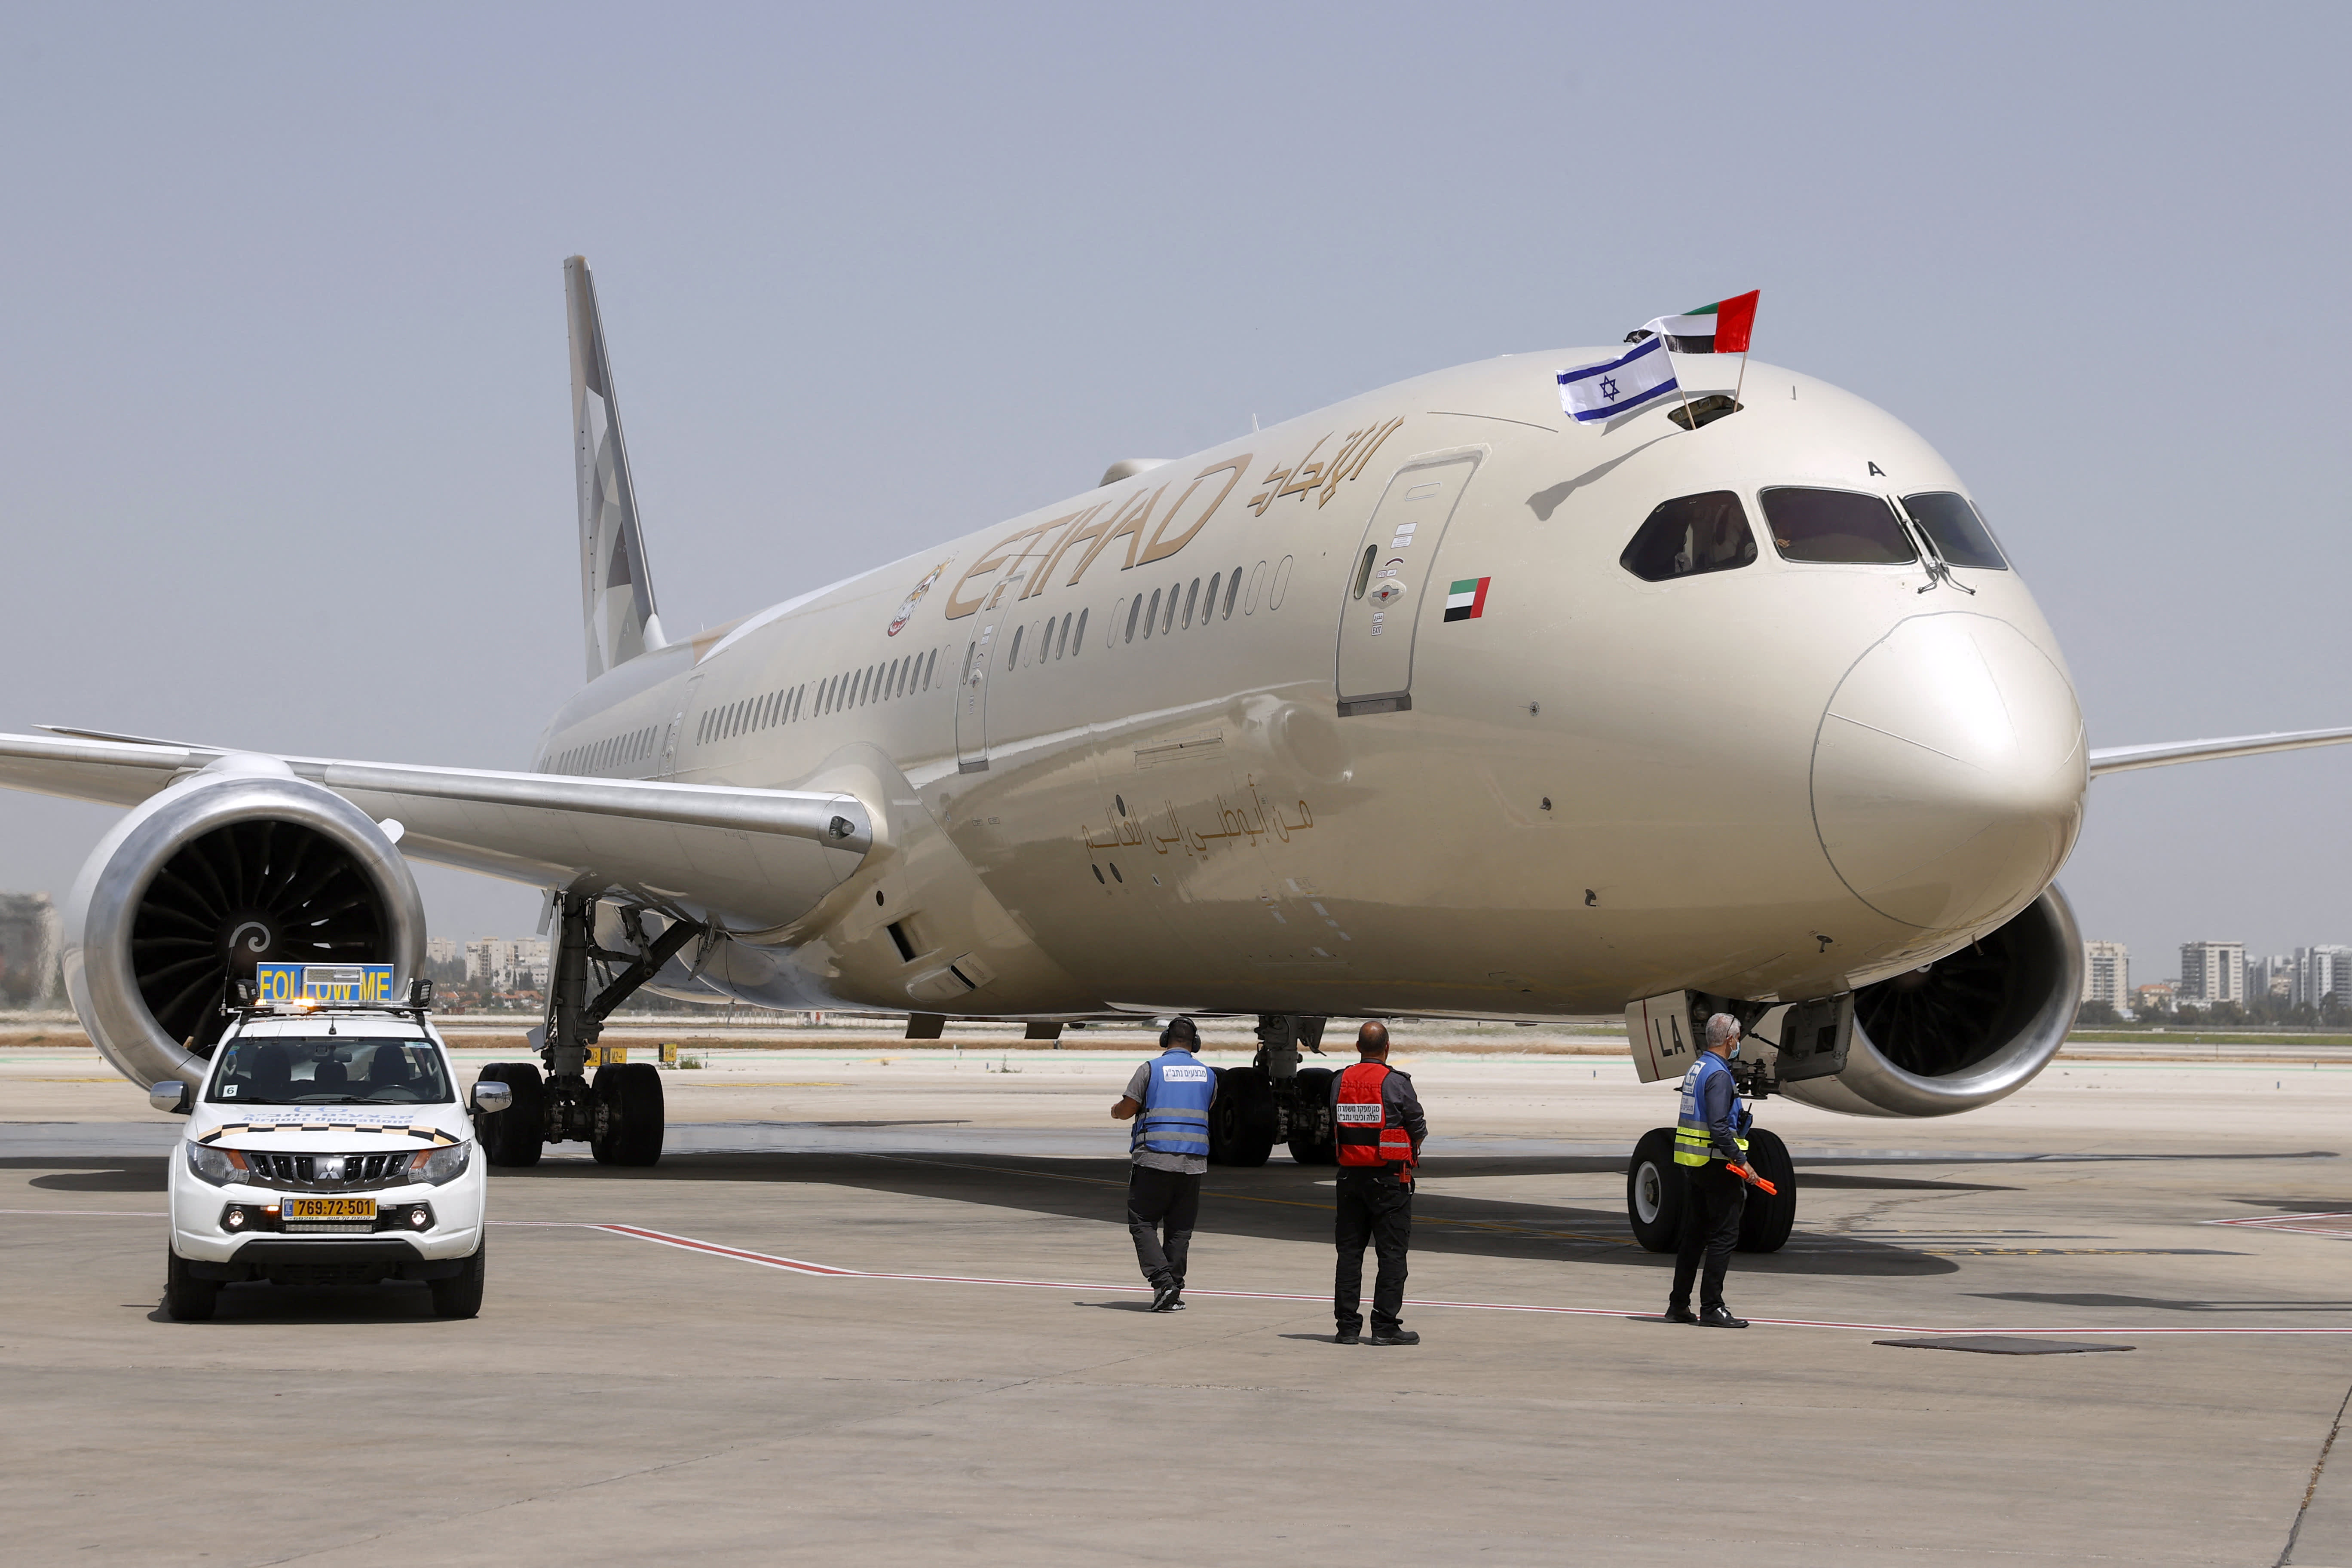 Eithad Airlines Offers Budget Friendly Flights to the Middle East